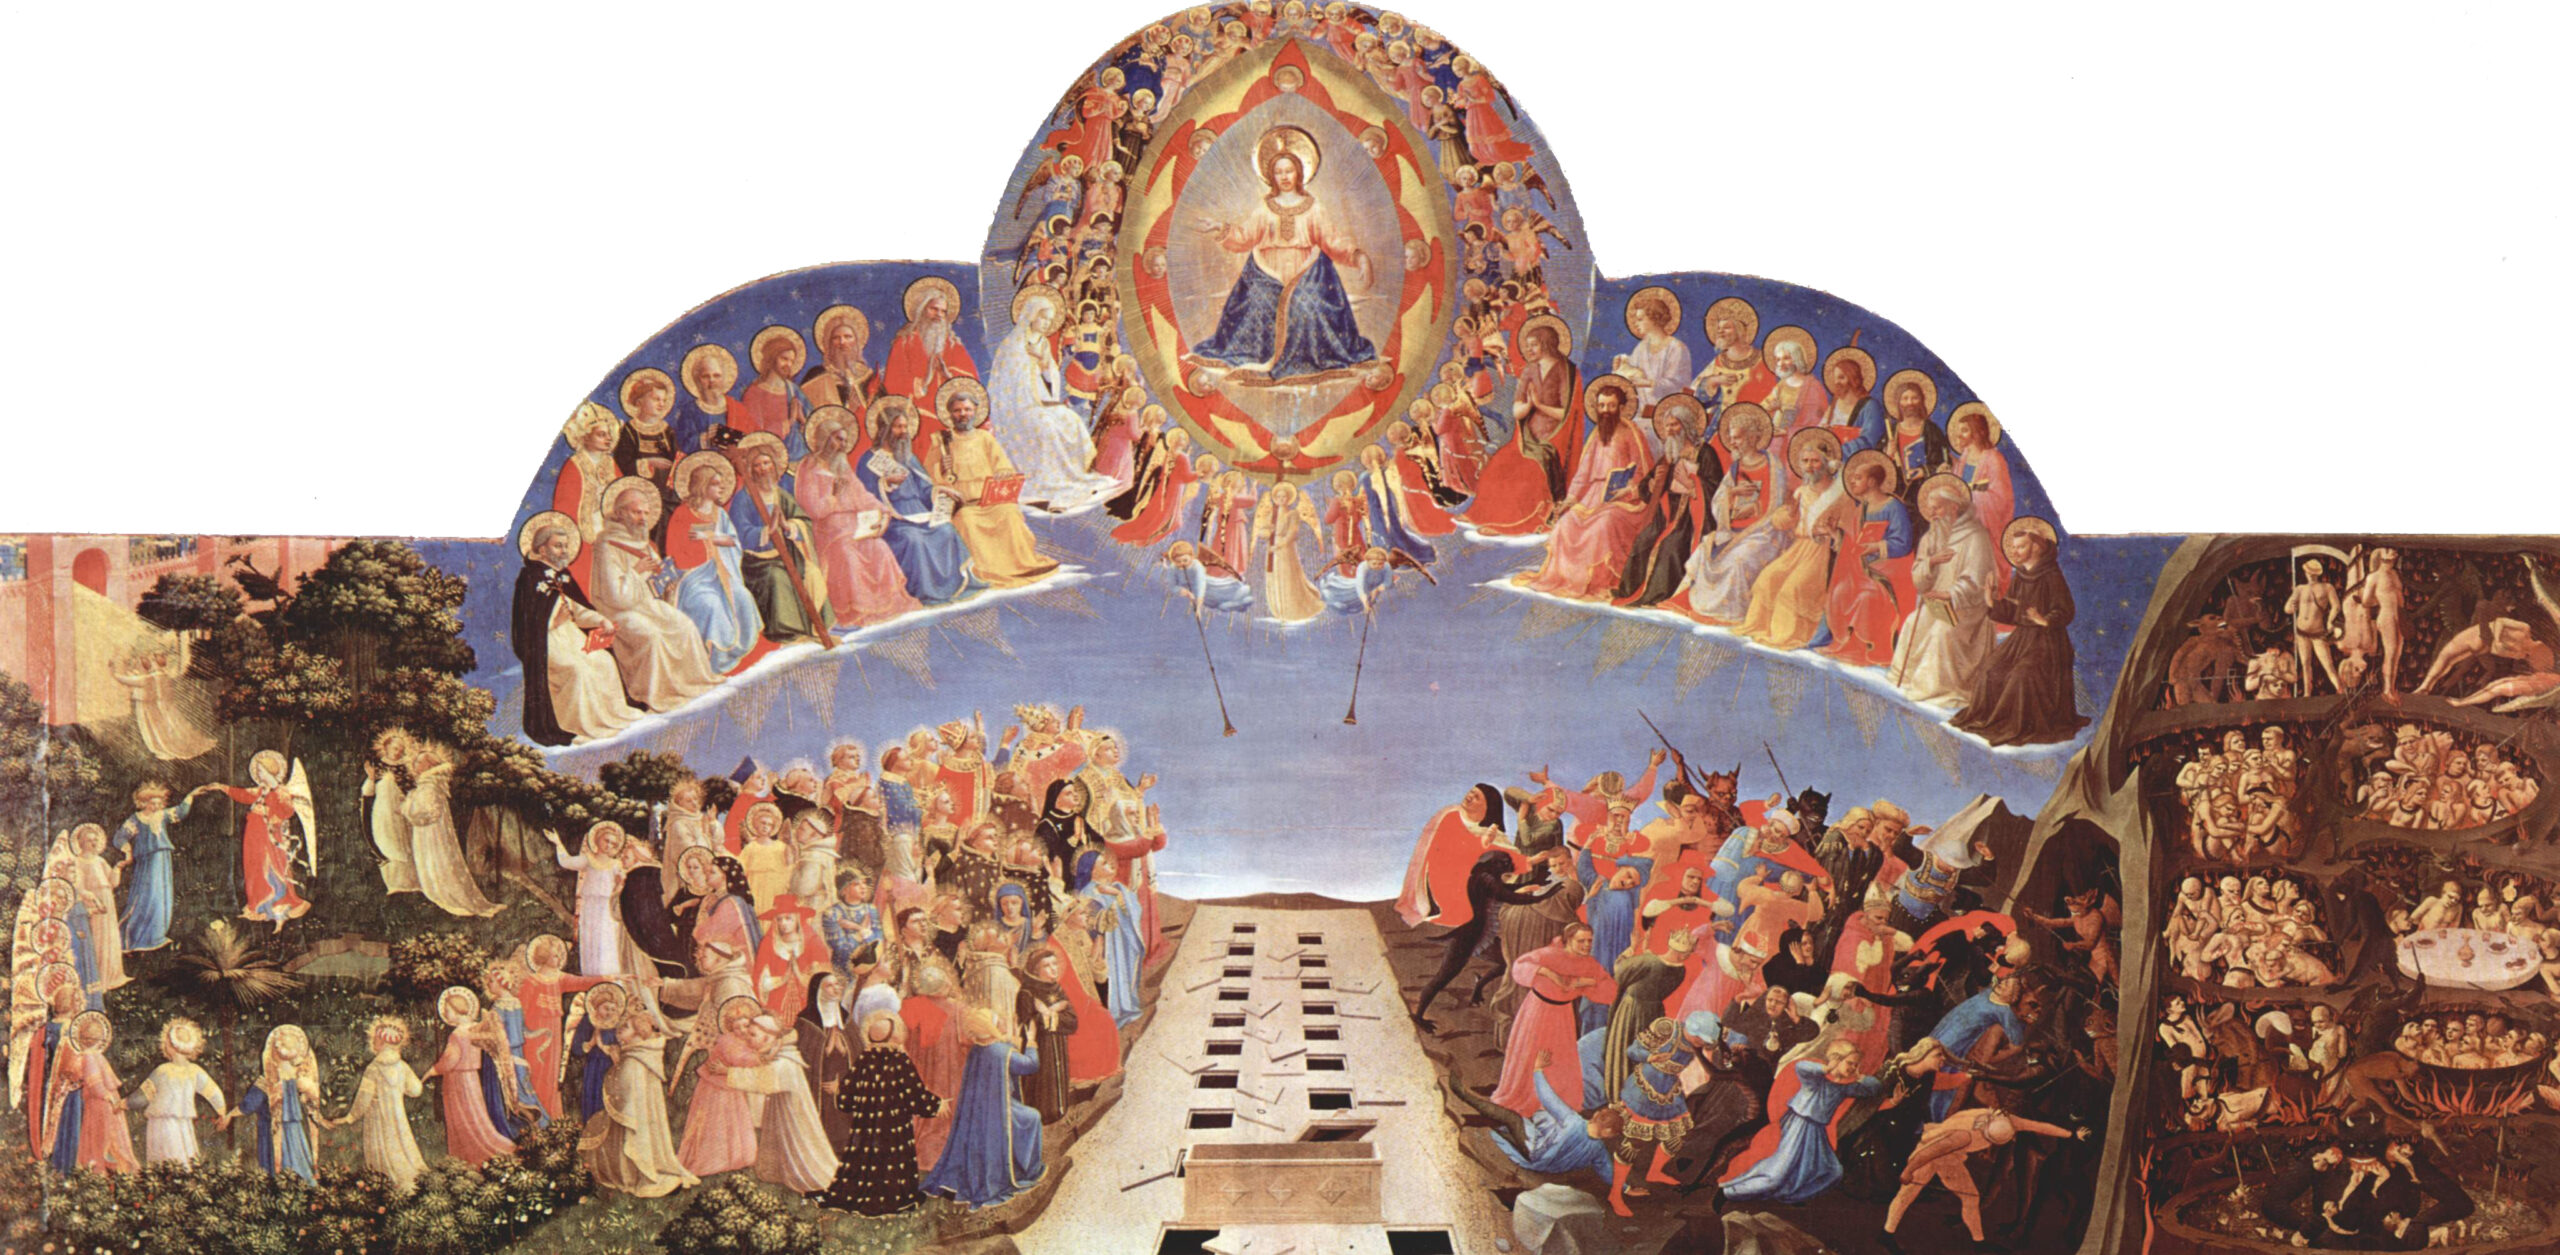 Fra Angelico (circa 1395 –1455) The Last Judgment